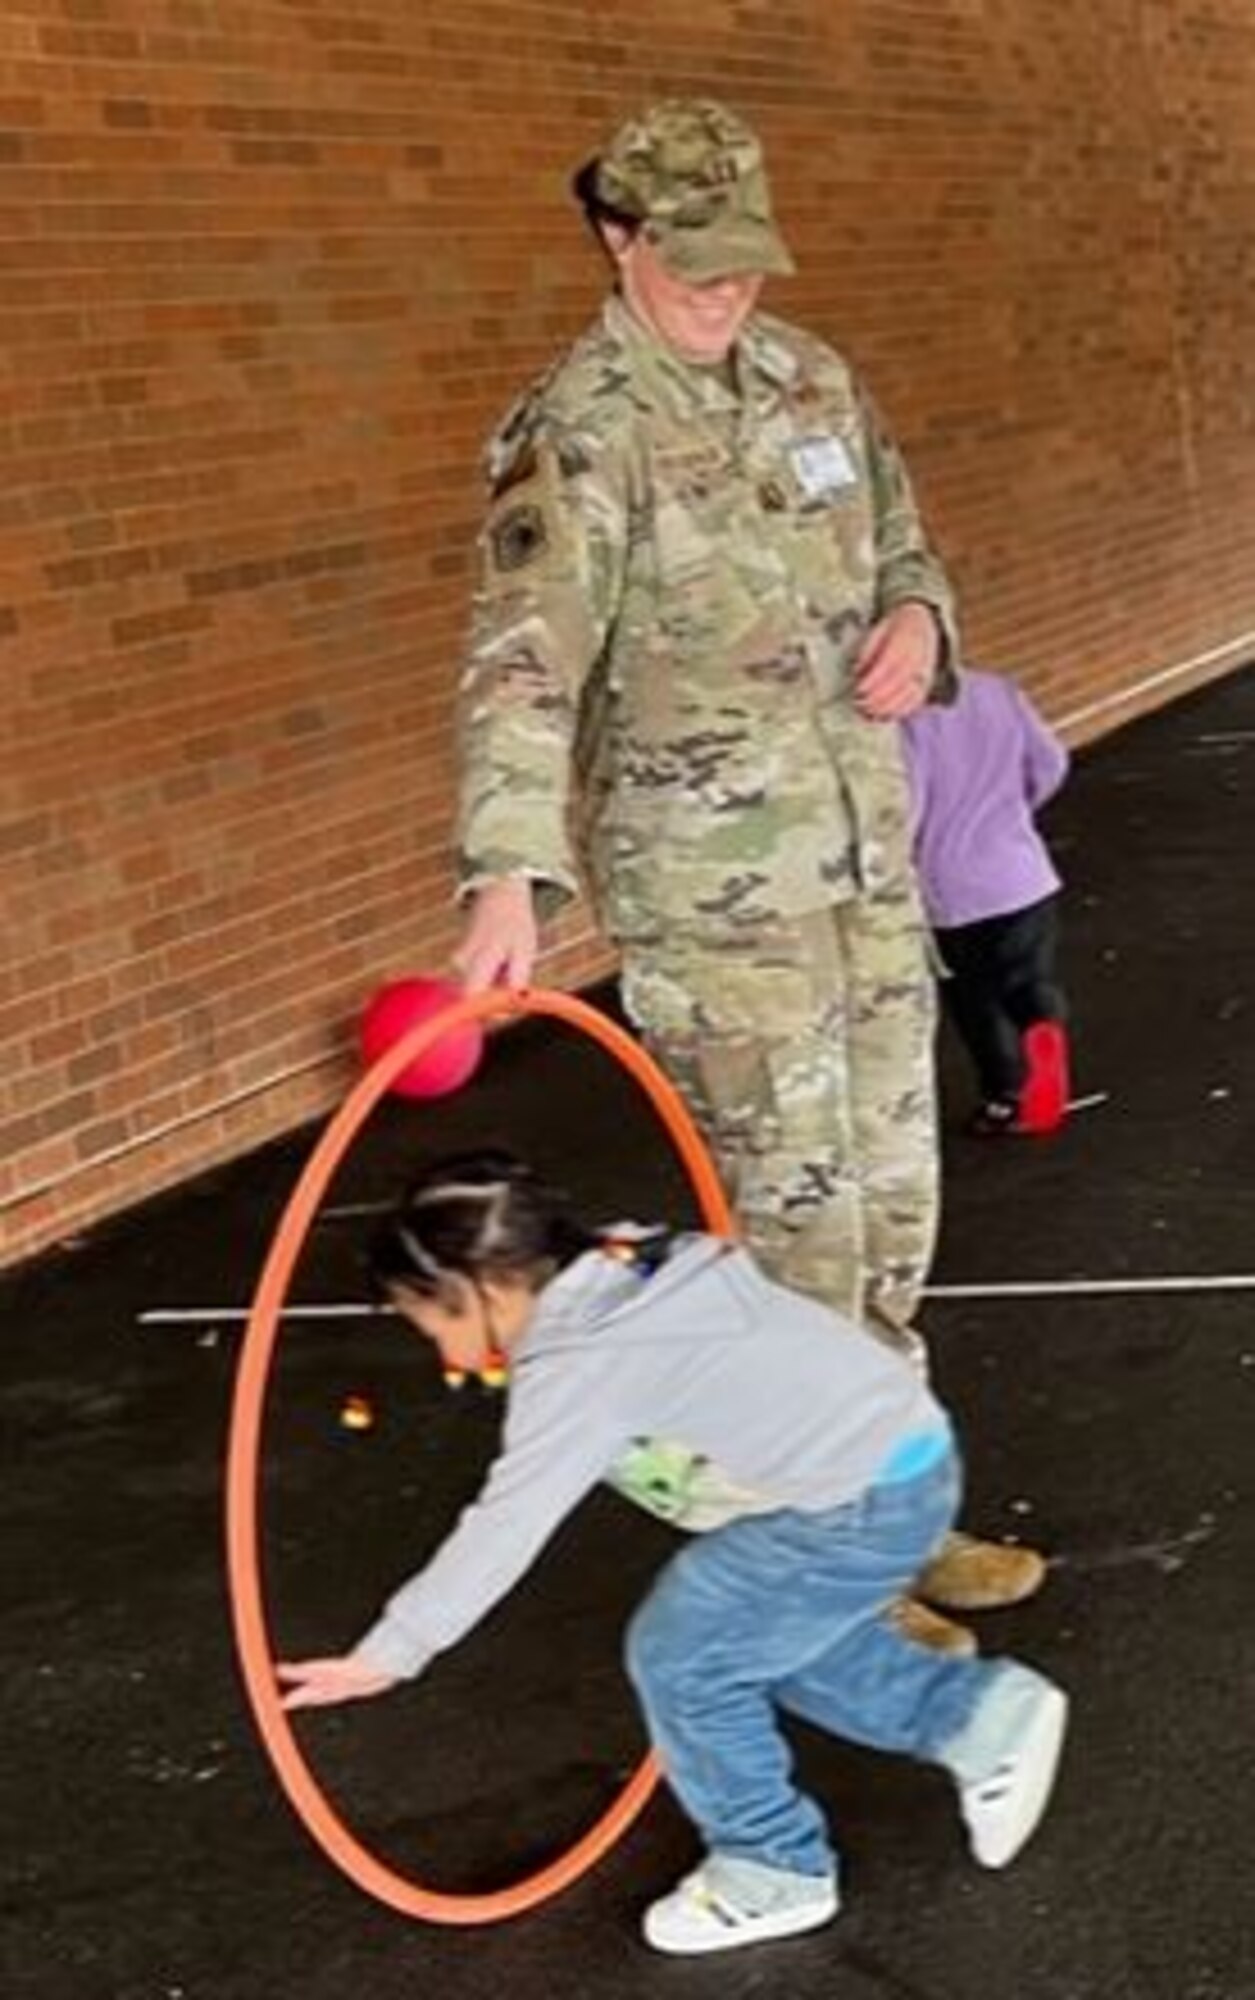 The Partnership in Education or PIE program, which is designed to enhance educational opportunities for youth and community outreach efforts for JBLM service members.